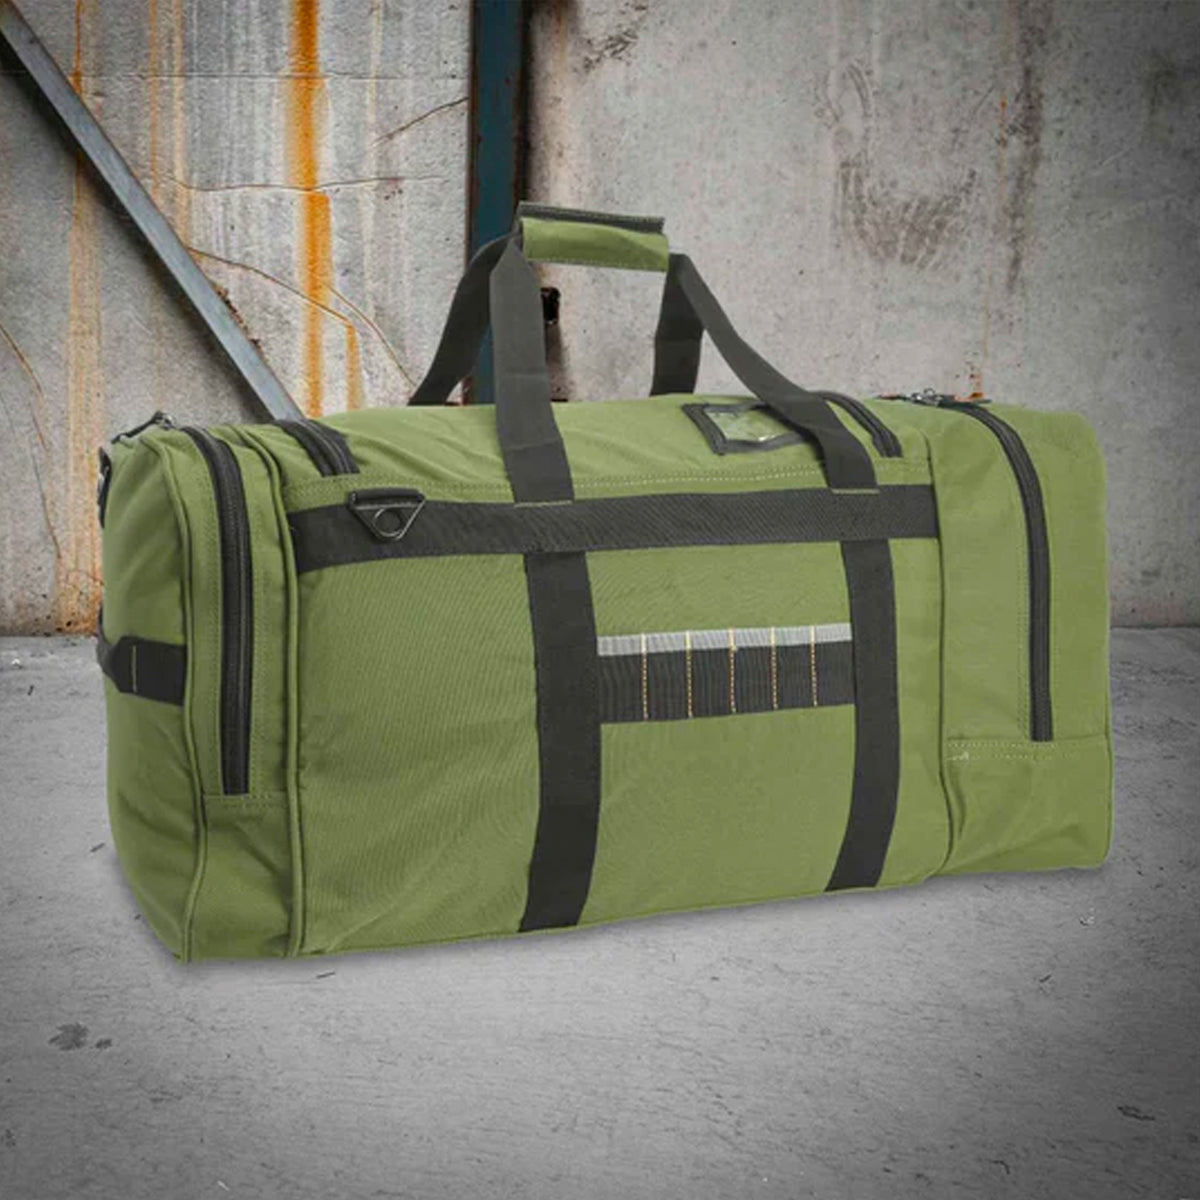 rugged xtremes ppe kit bag in green canvas